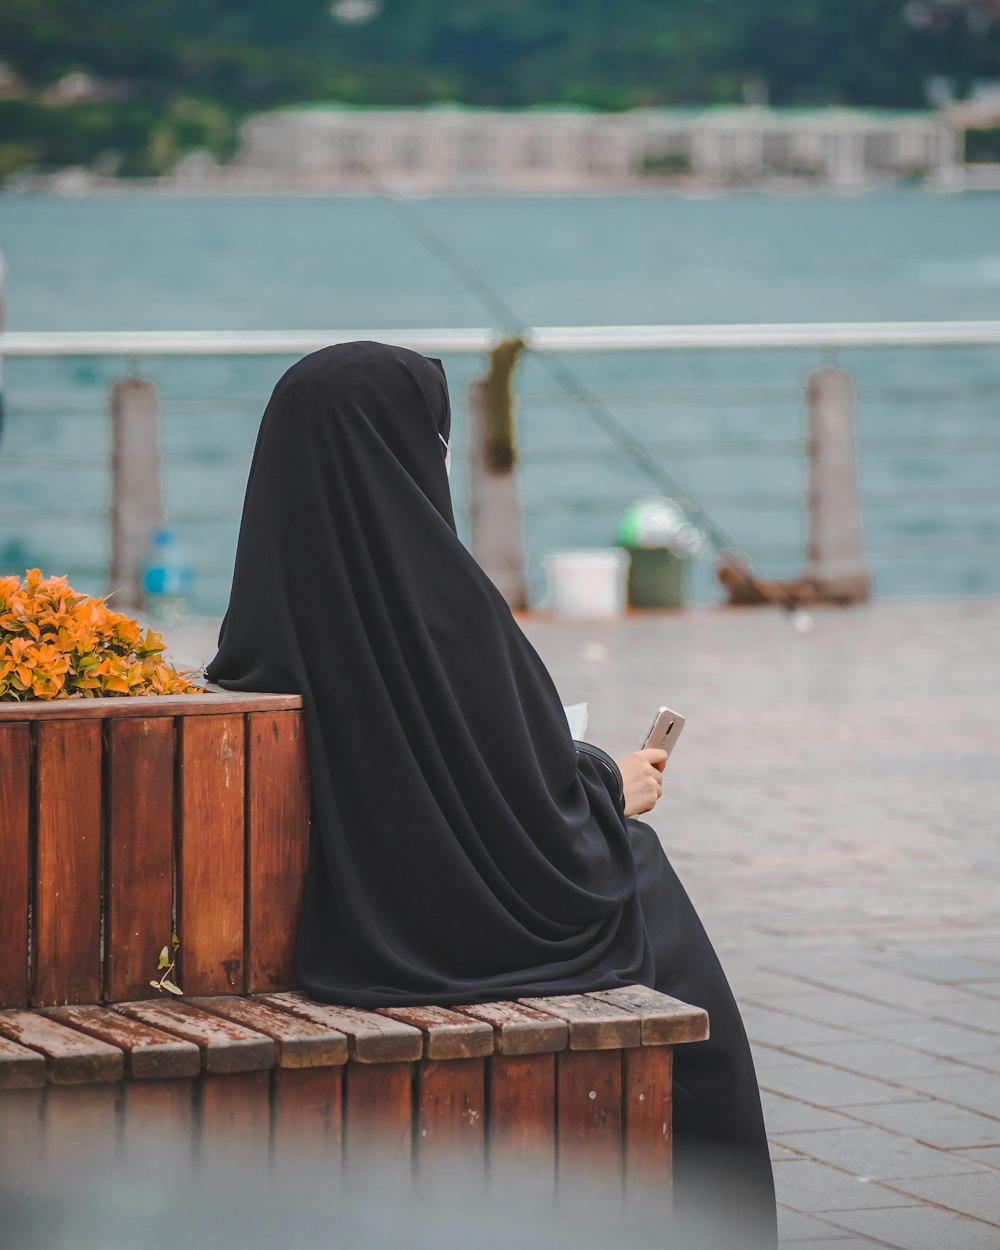 500+ Muslim Girl Pictures [HD] | Download Free Images on Unsplash